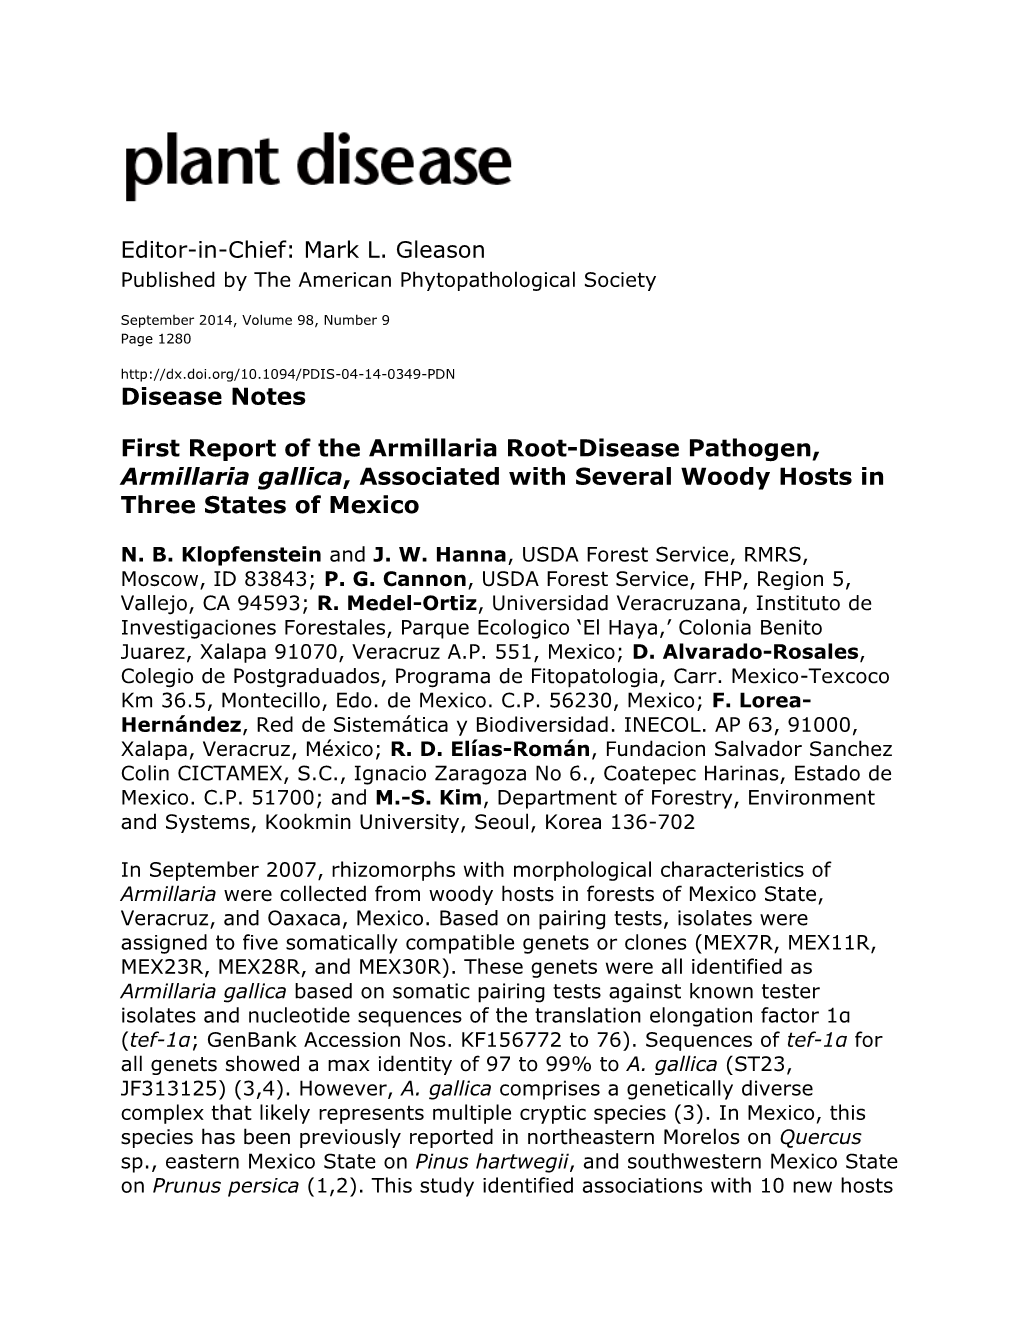 First Report of the Armillaria Root-Disease Pathogen, Armillaria Gallica, Associated with Several Woody Hosts in Three States of Mexico